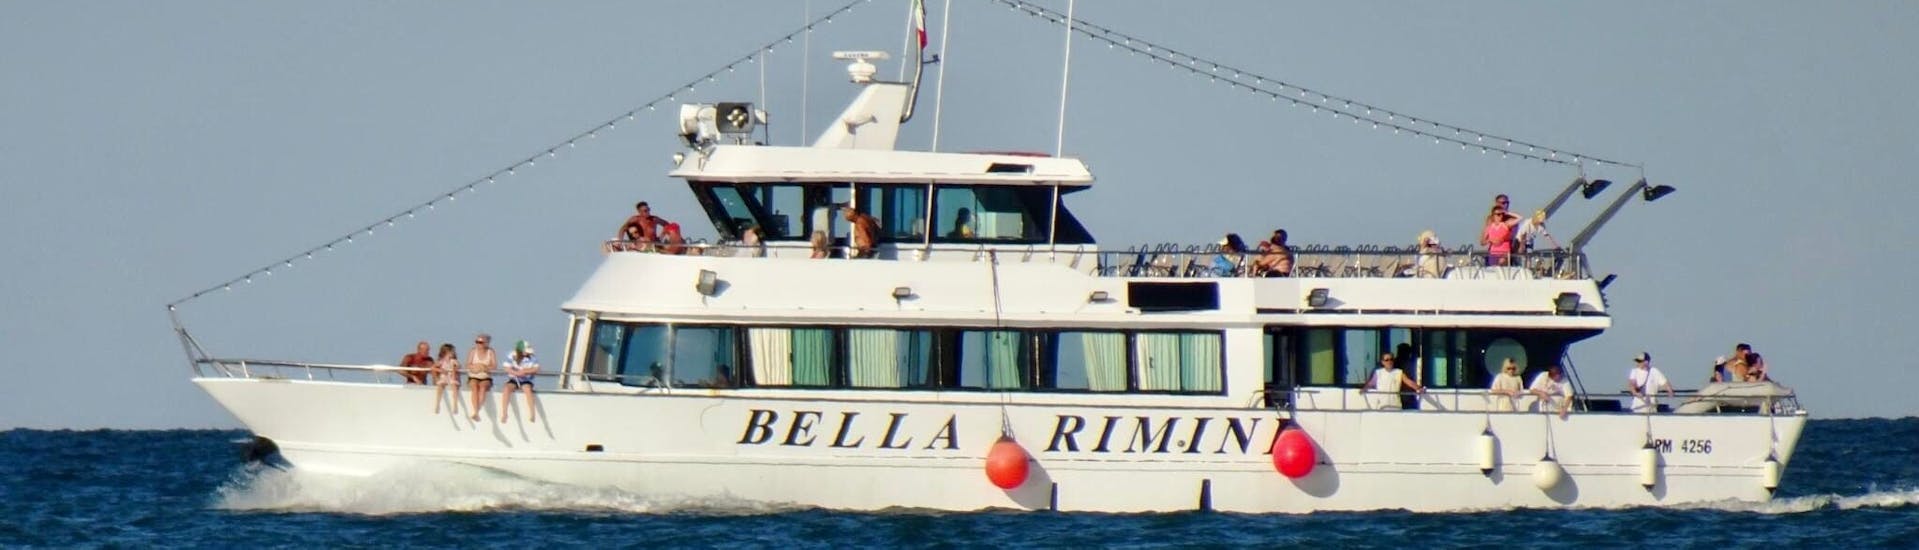 The boat Bella Rimini during the Boat Trip to the Gulf of Orosei & Grotta del Fico with Swimming Stops with Sardinia Natural Park Tours.